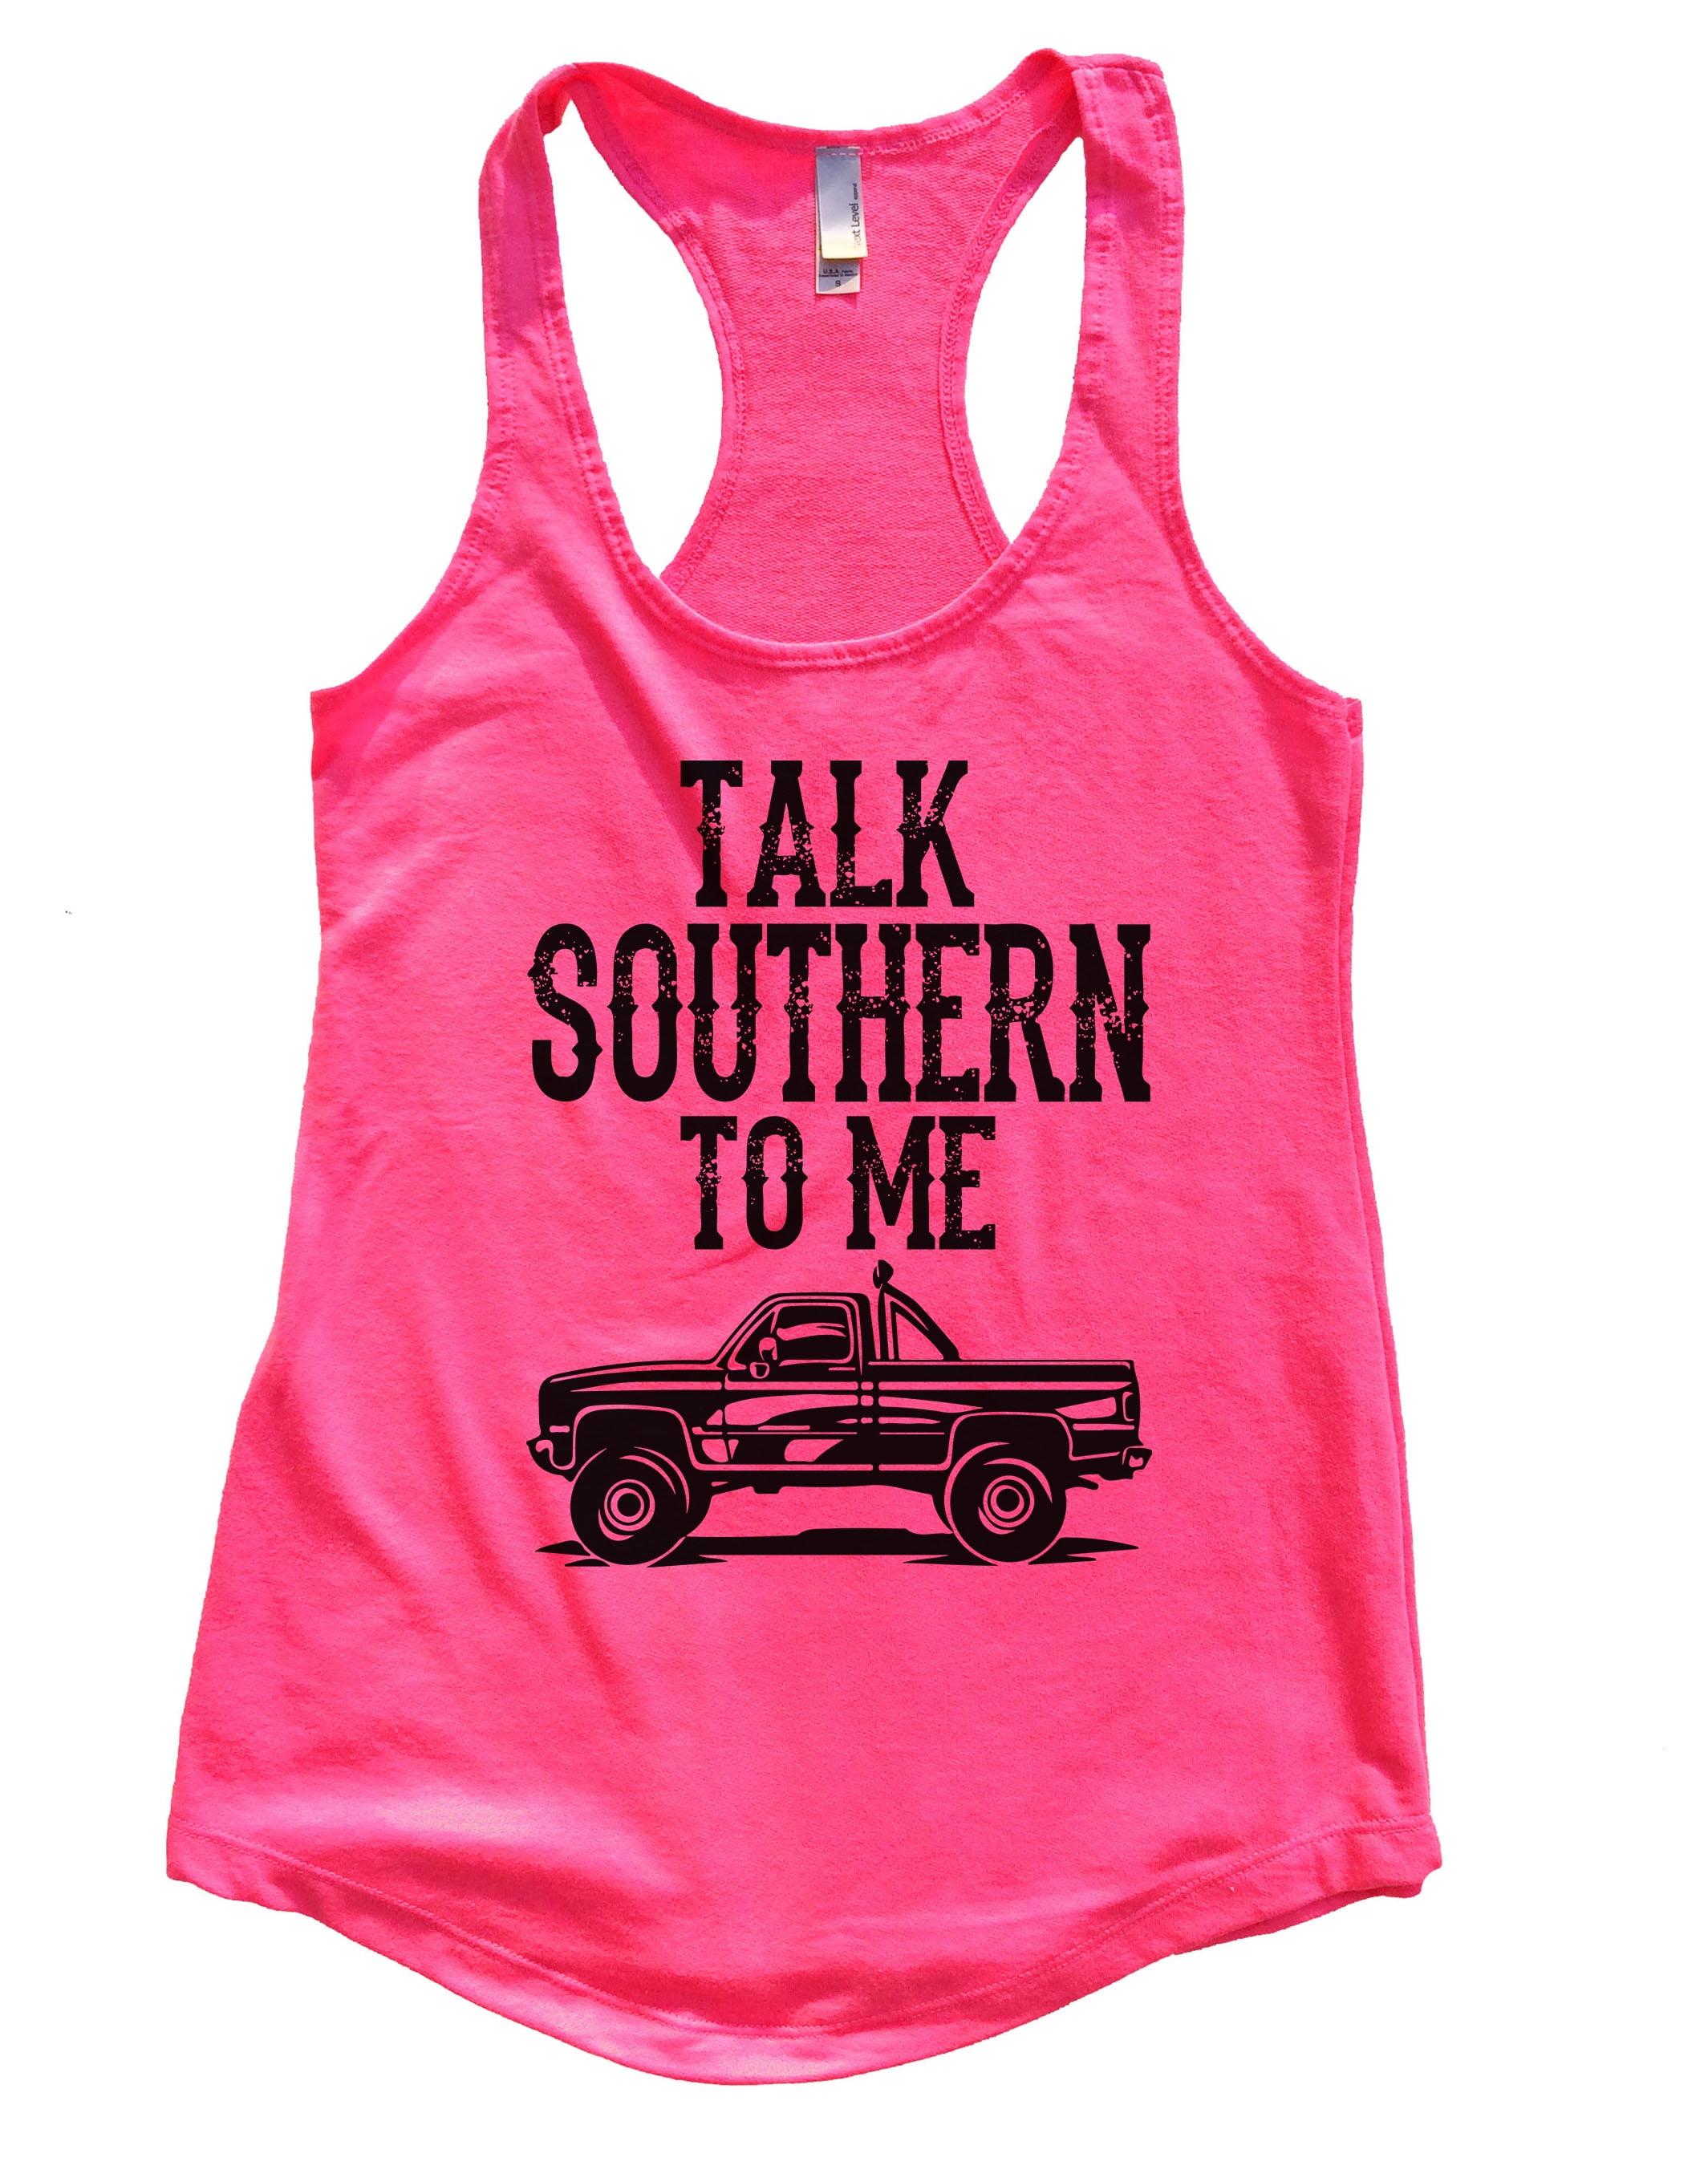 country music tank party tank drinking tank life is better in boots country girl tank country tank top